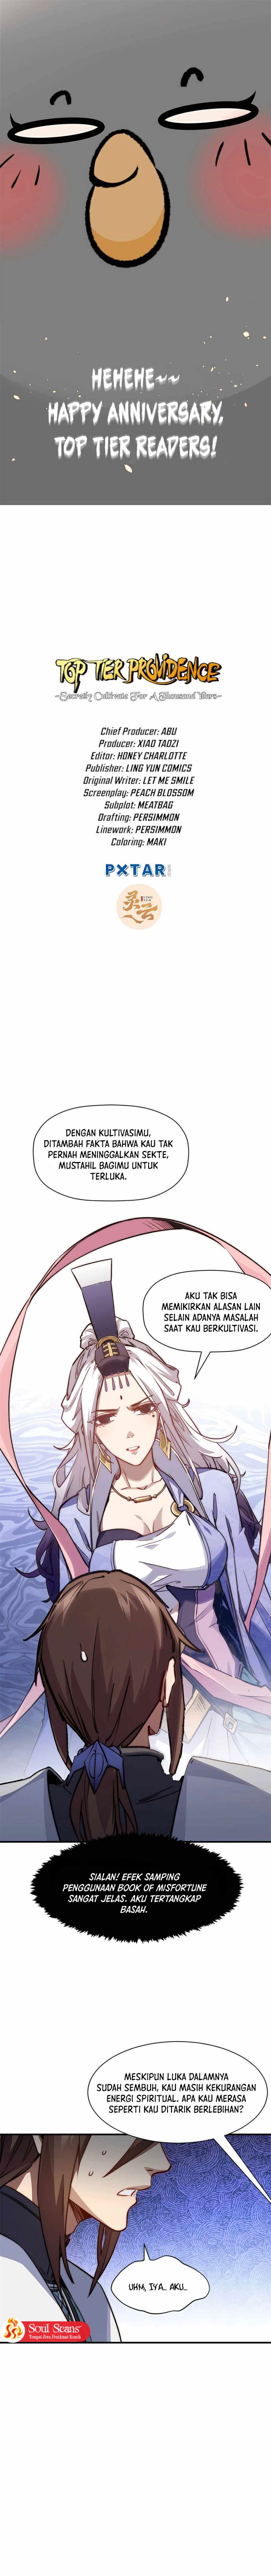 Dilarang COPAS - situs resmi www.mangacanblog.com - Komik top tier providence secretly cultivate for a thousand years 122 - chapter 122 123 Indonesia top tier providence secretly cultivate for a thousand years 122 - chapter 122 Terbaru 2|Baca Manga Komik Indonesia|Mangacan